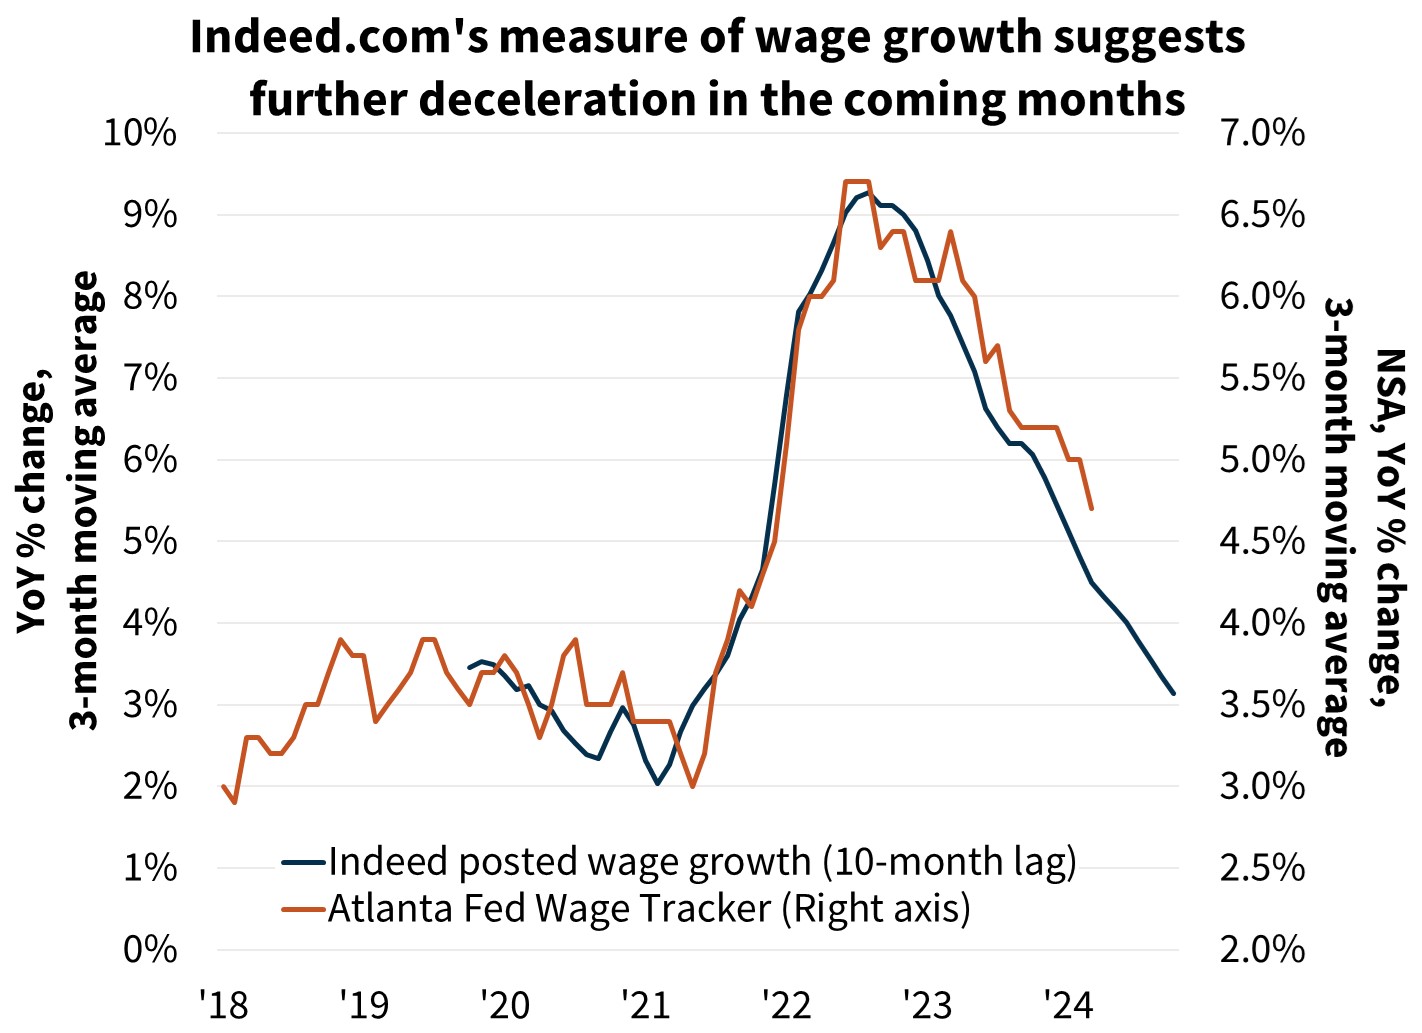 Indeed.com's measure of wage growth suggests further deceleration in the coming months